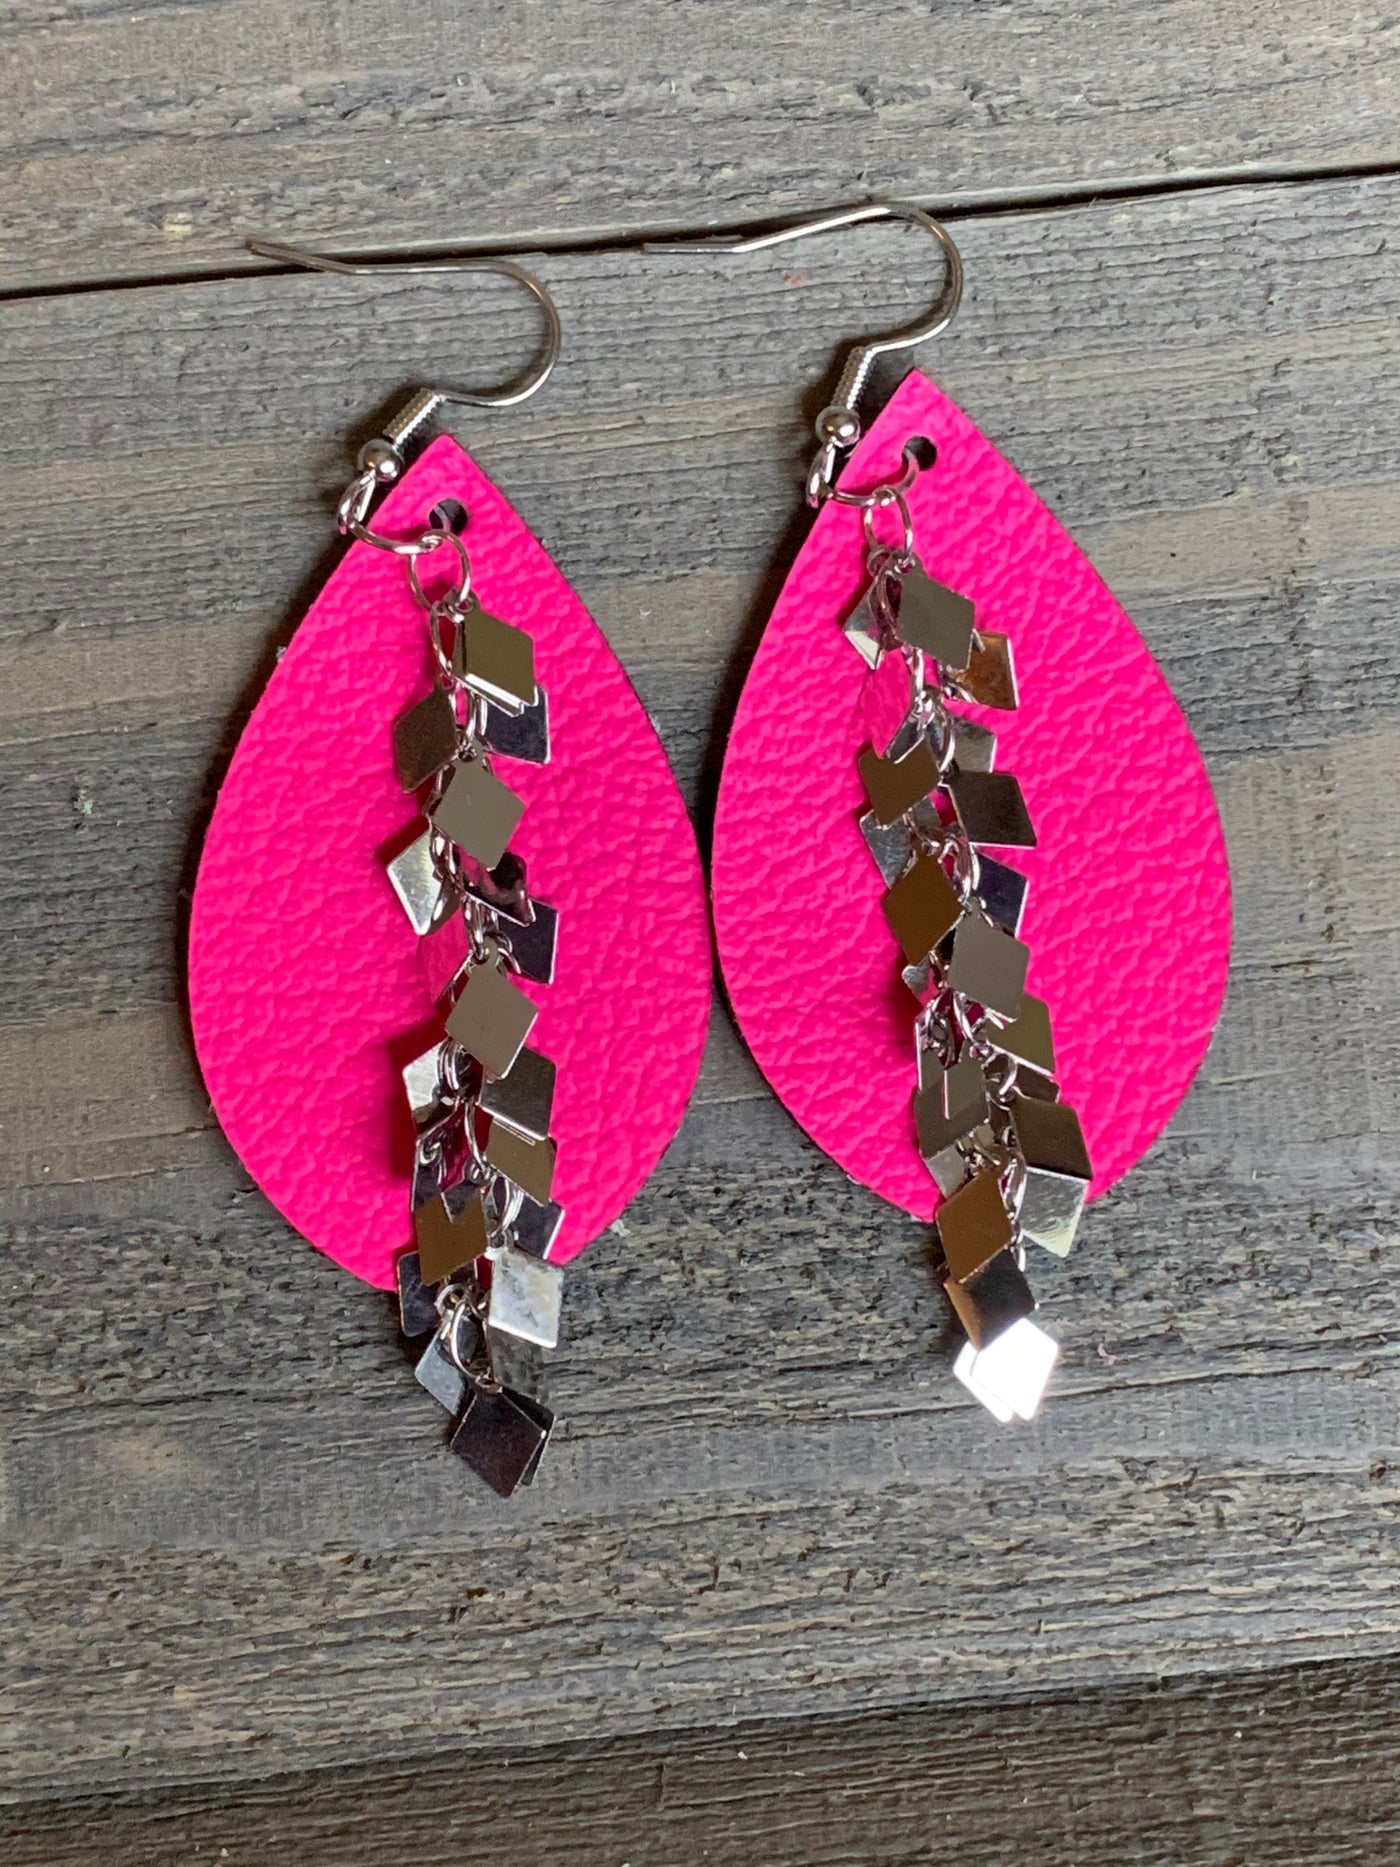 Neon Pink Leather Earrings with Silver Diamond Chain - Jill's Jewels | Unique, Handcrafted, Trendy, And Fun Jewelry